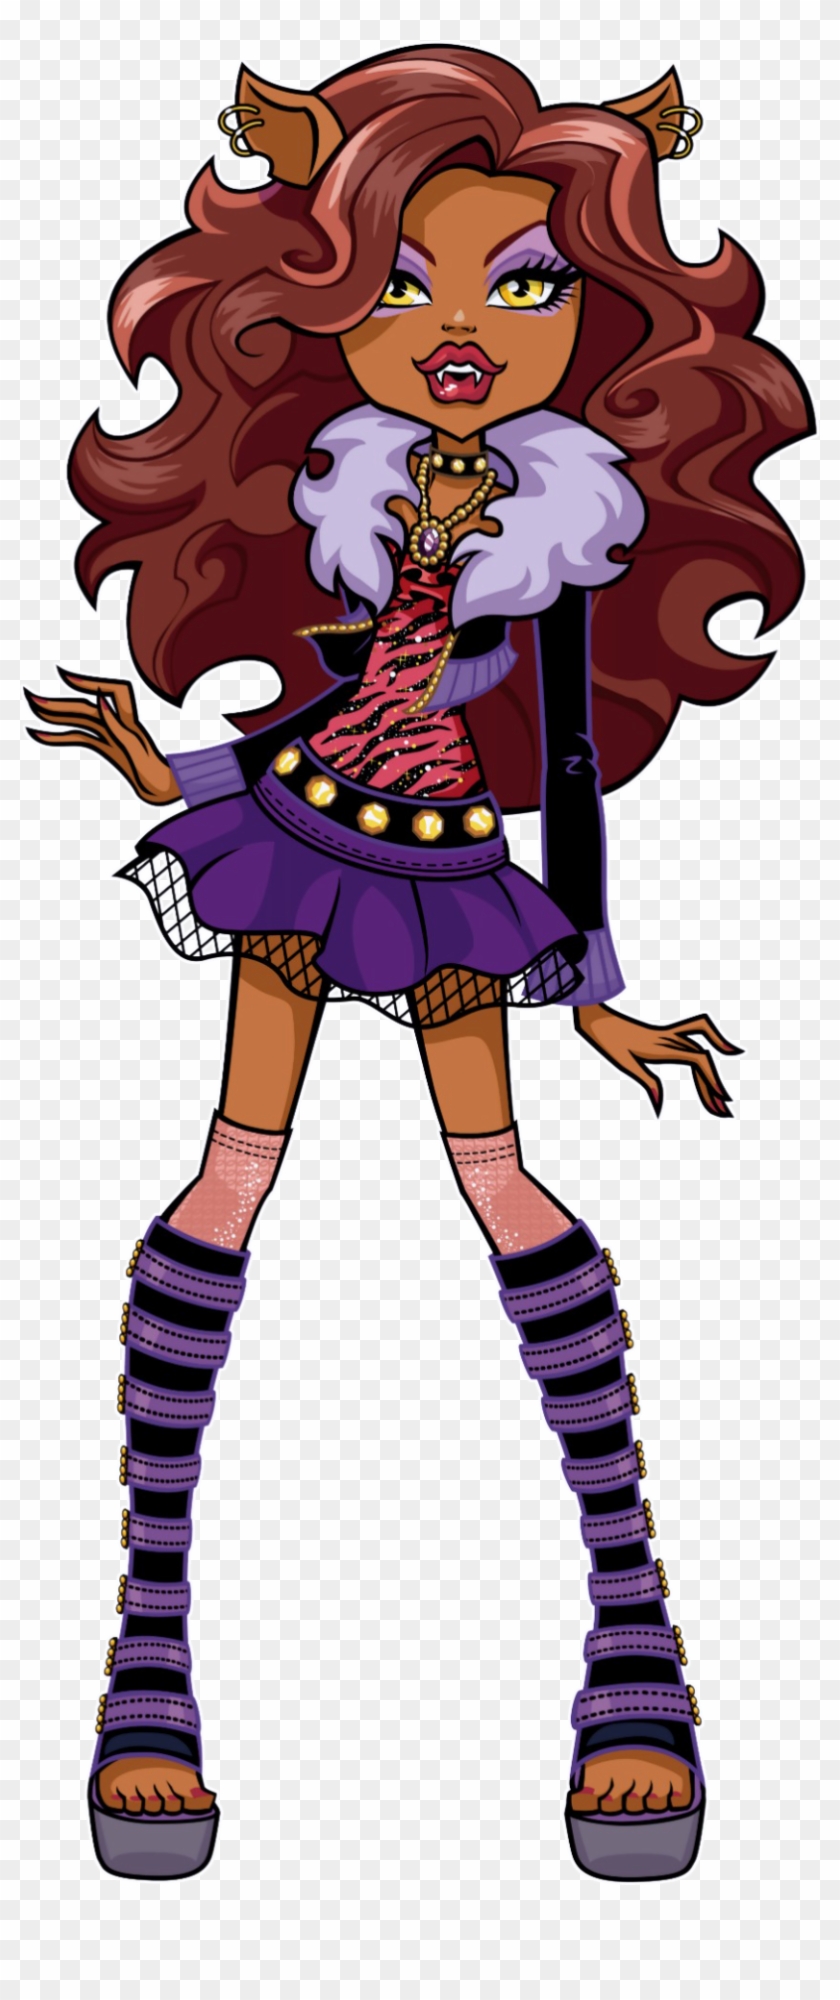 Confident And Fierce, She Is Considered The School's - Monster High Clawdeen Wolf #1126216